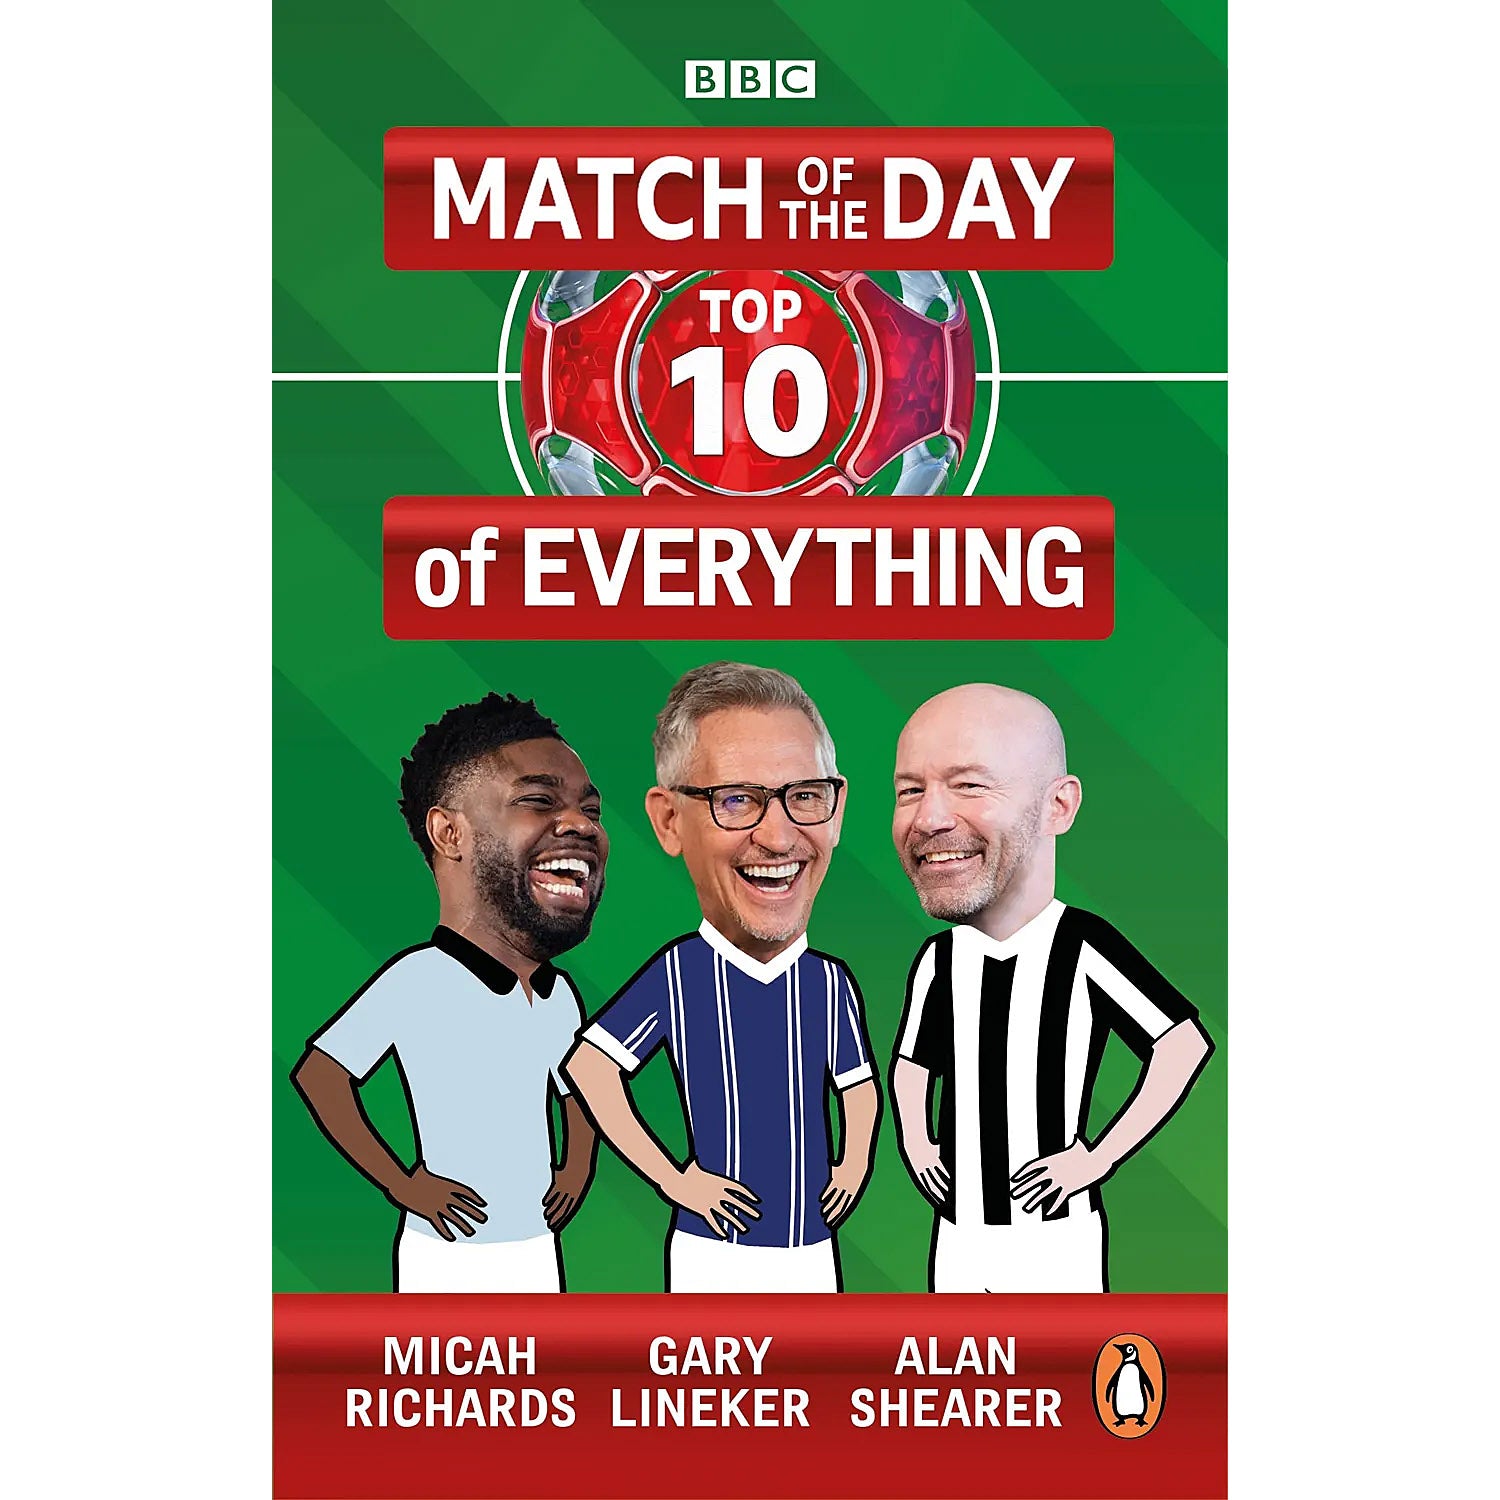 Match of the Day – Top 10 of Everything